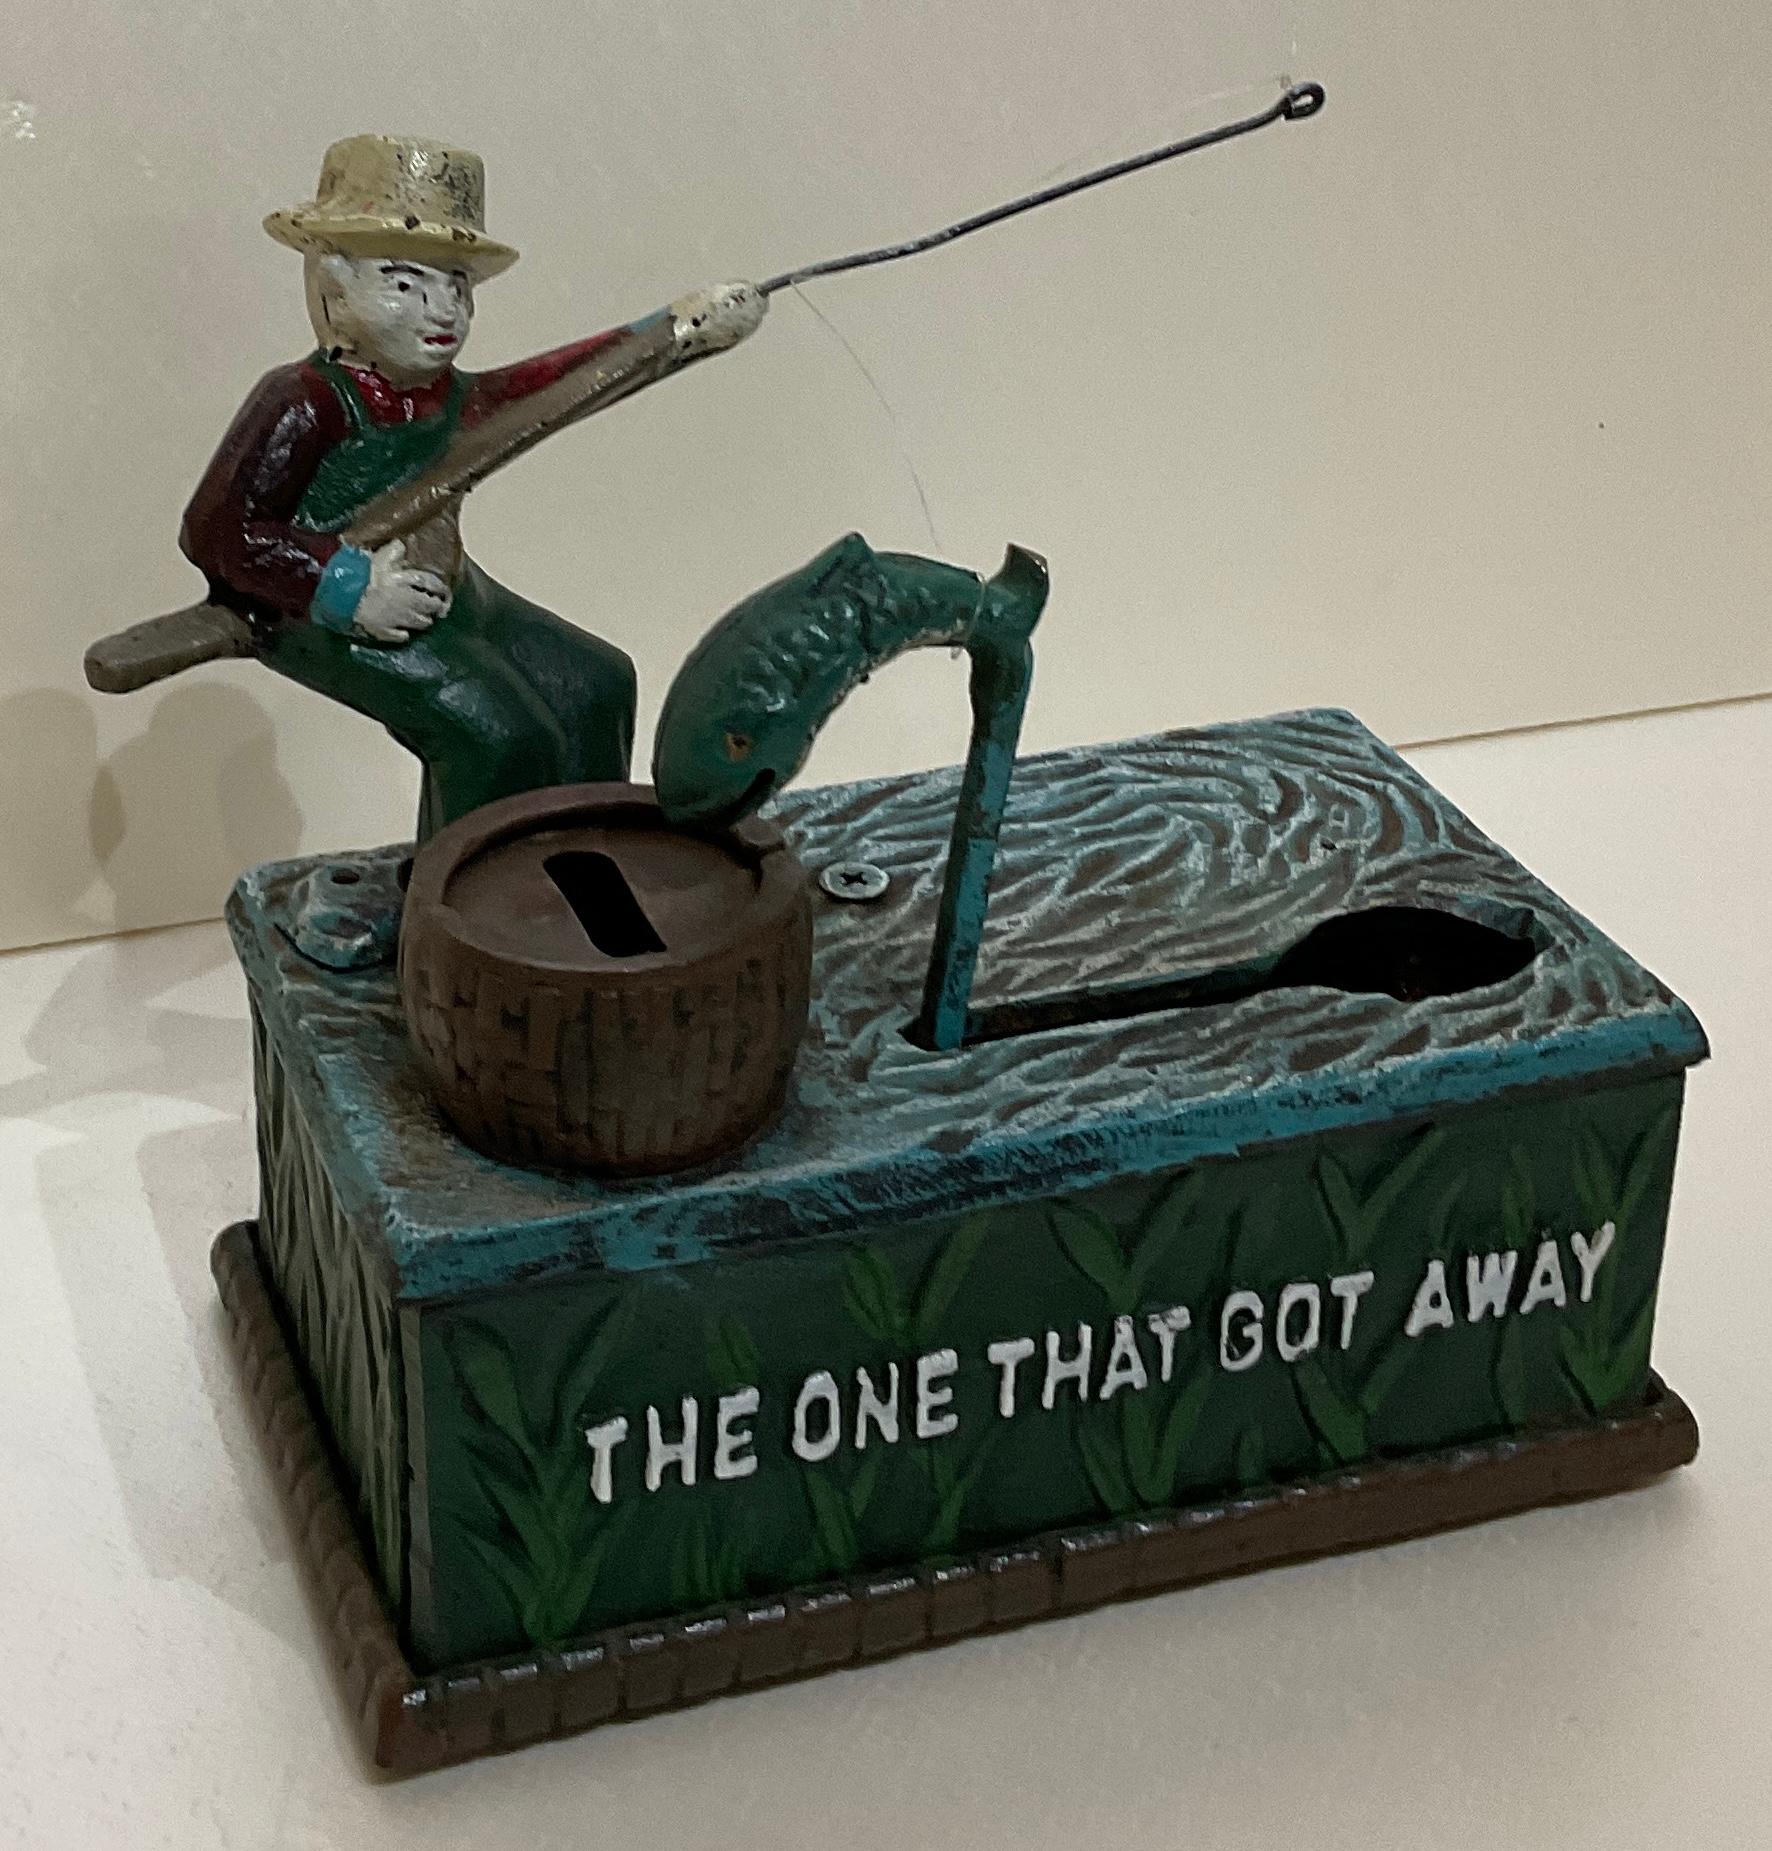 A nice sized Early 20th century American cast iron piggy, penny bank or money box. This decorative bank features a boy fishing and obtains its original antique painted patina. Funny marking 